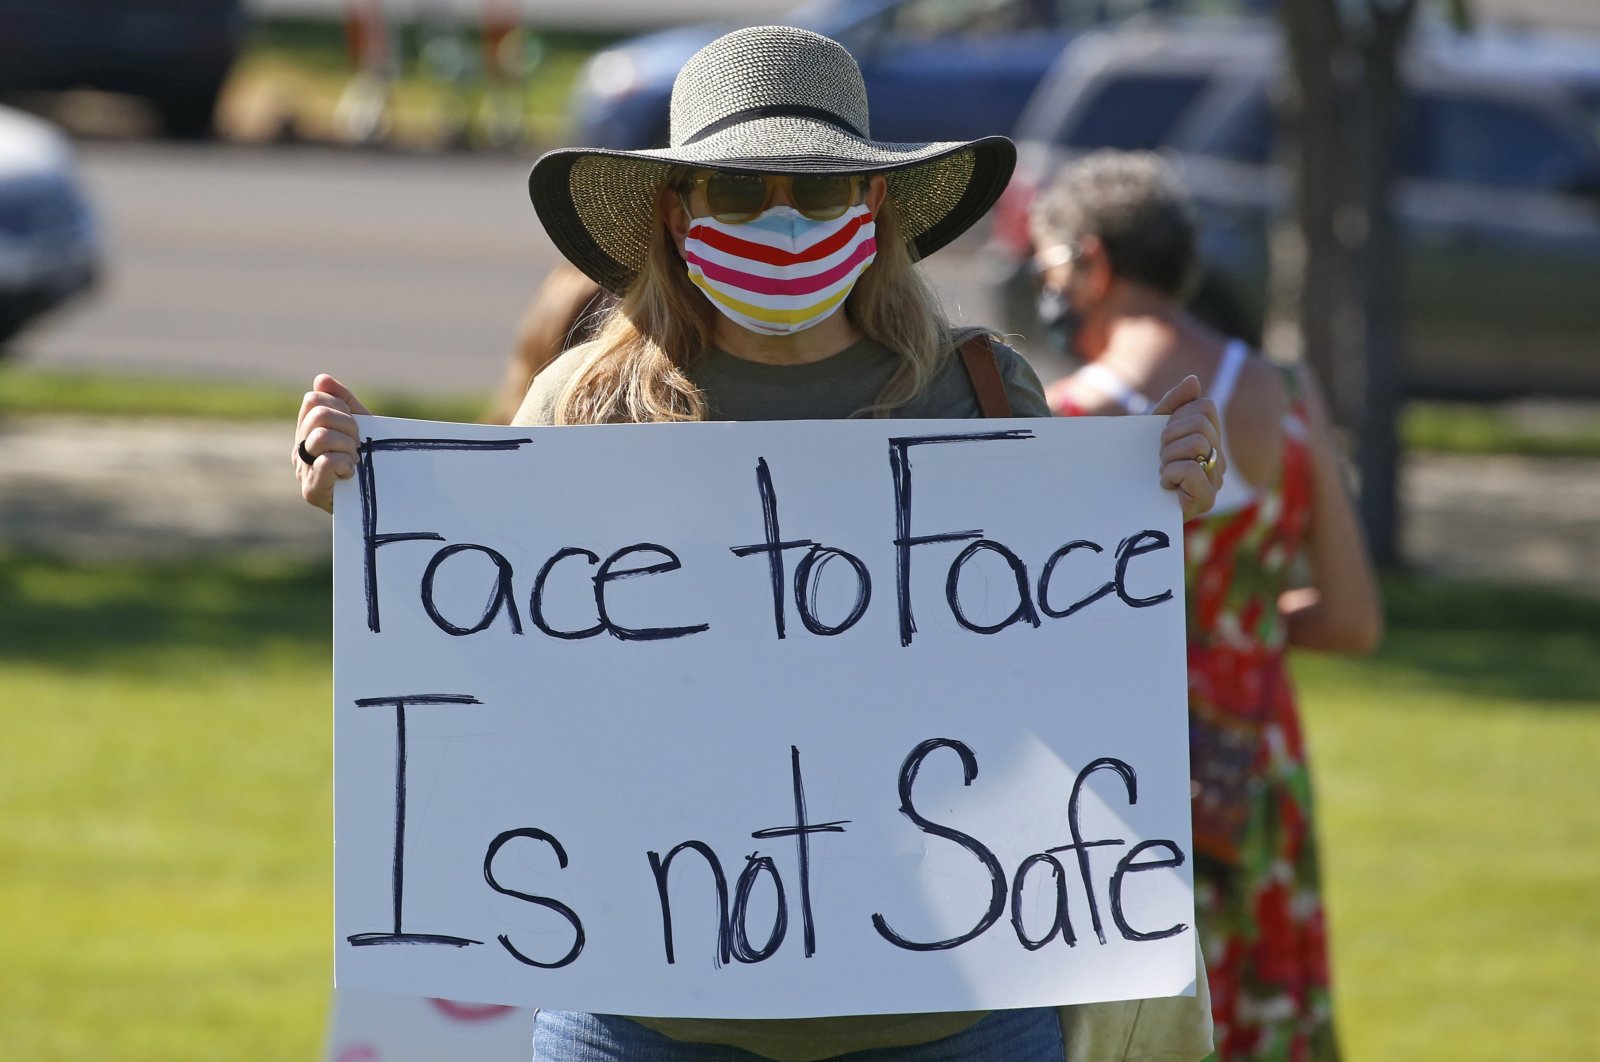 A teacher attends a Utah Safe Schools Mask-In urging the governor's leadership in school reopening during a rally in Salt Lake City, Utah, U.S., July 23, 2020. (AP Photo)